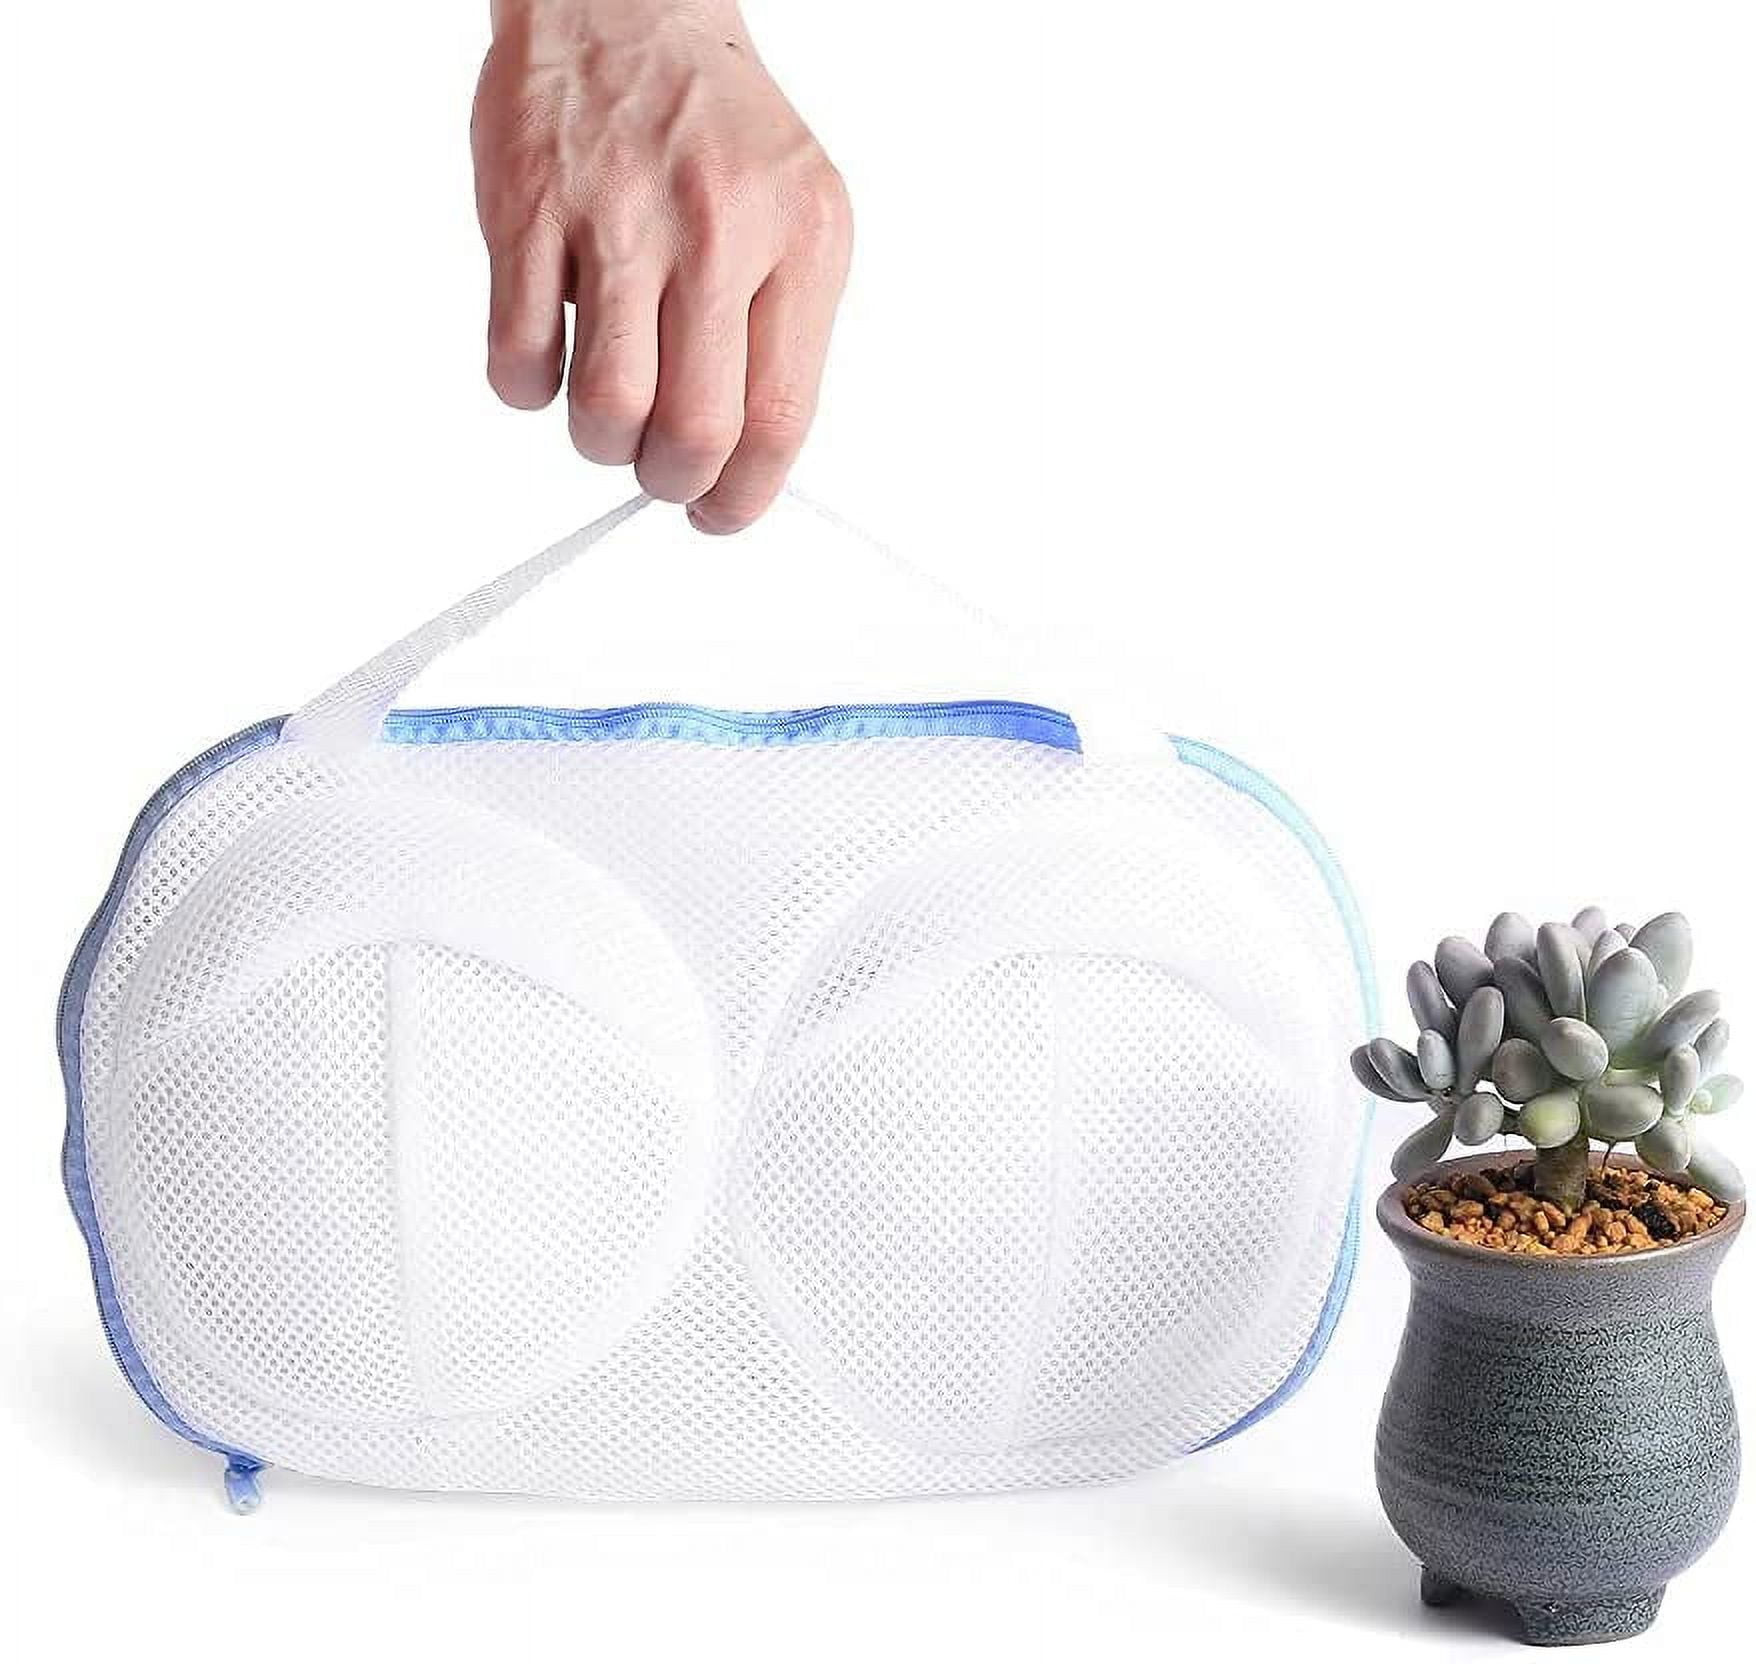 The Laundress Mesh Wash Bags - Uplift Intimate Apparel